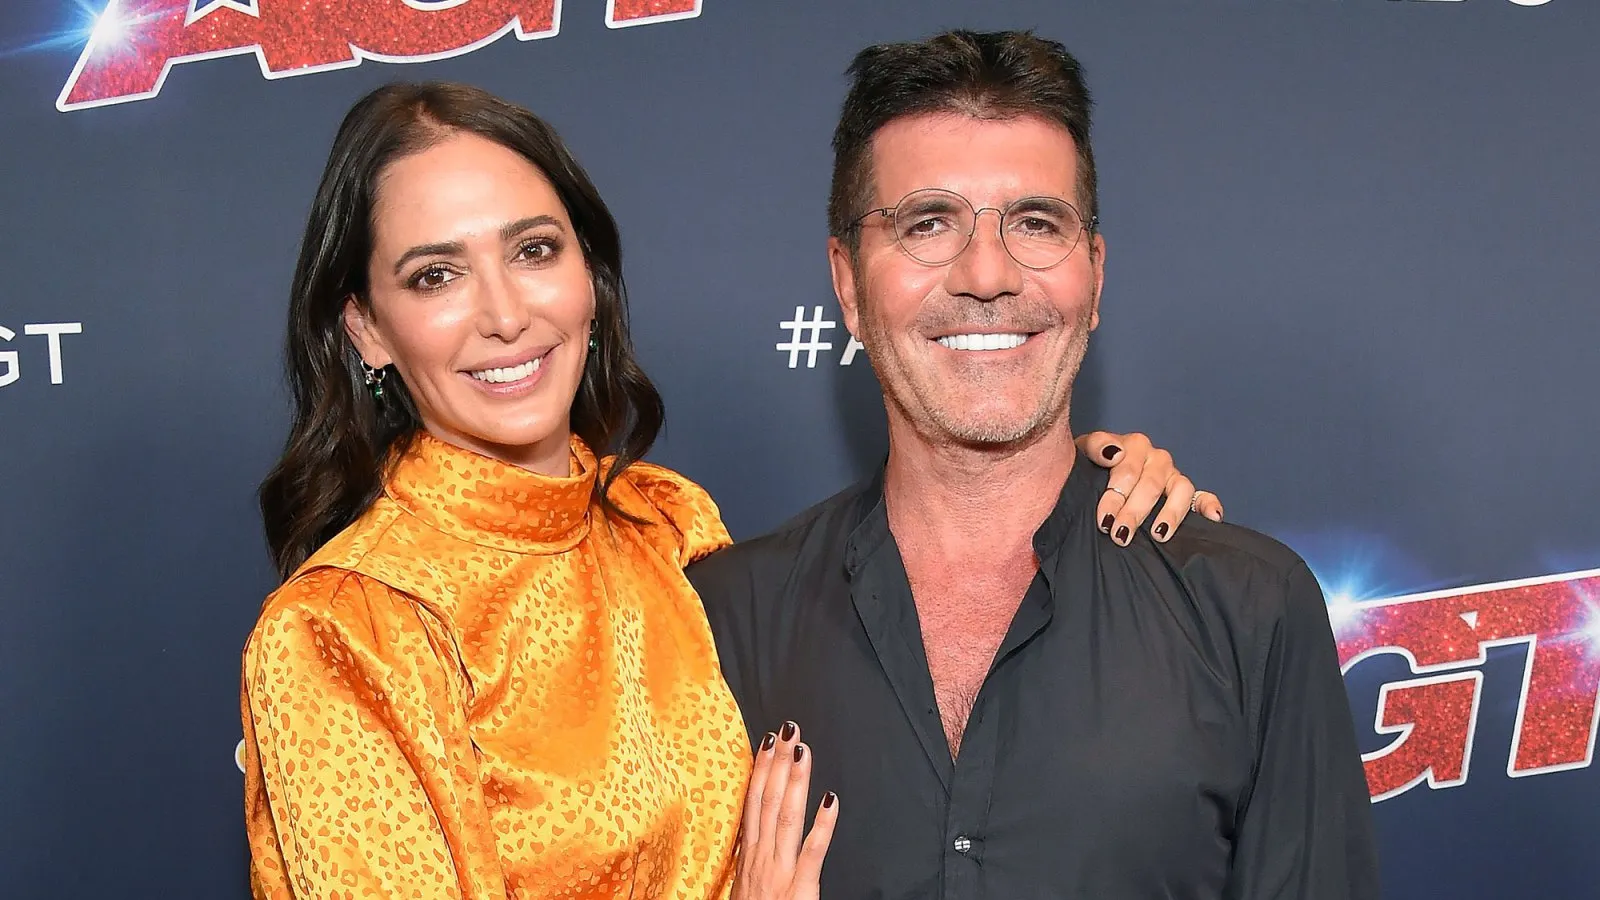 When and How Did Simon Cowell Meet His Fiancée?